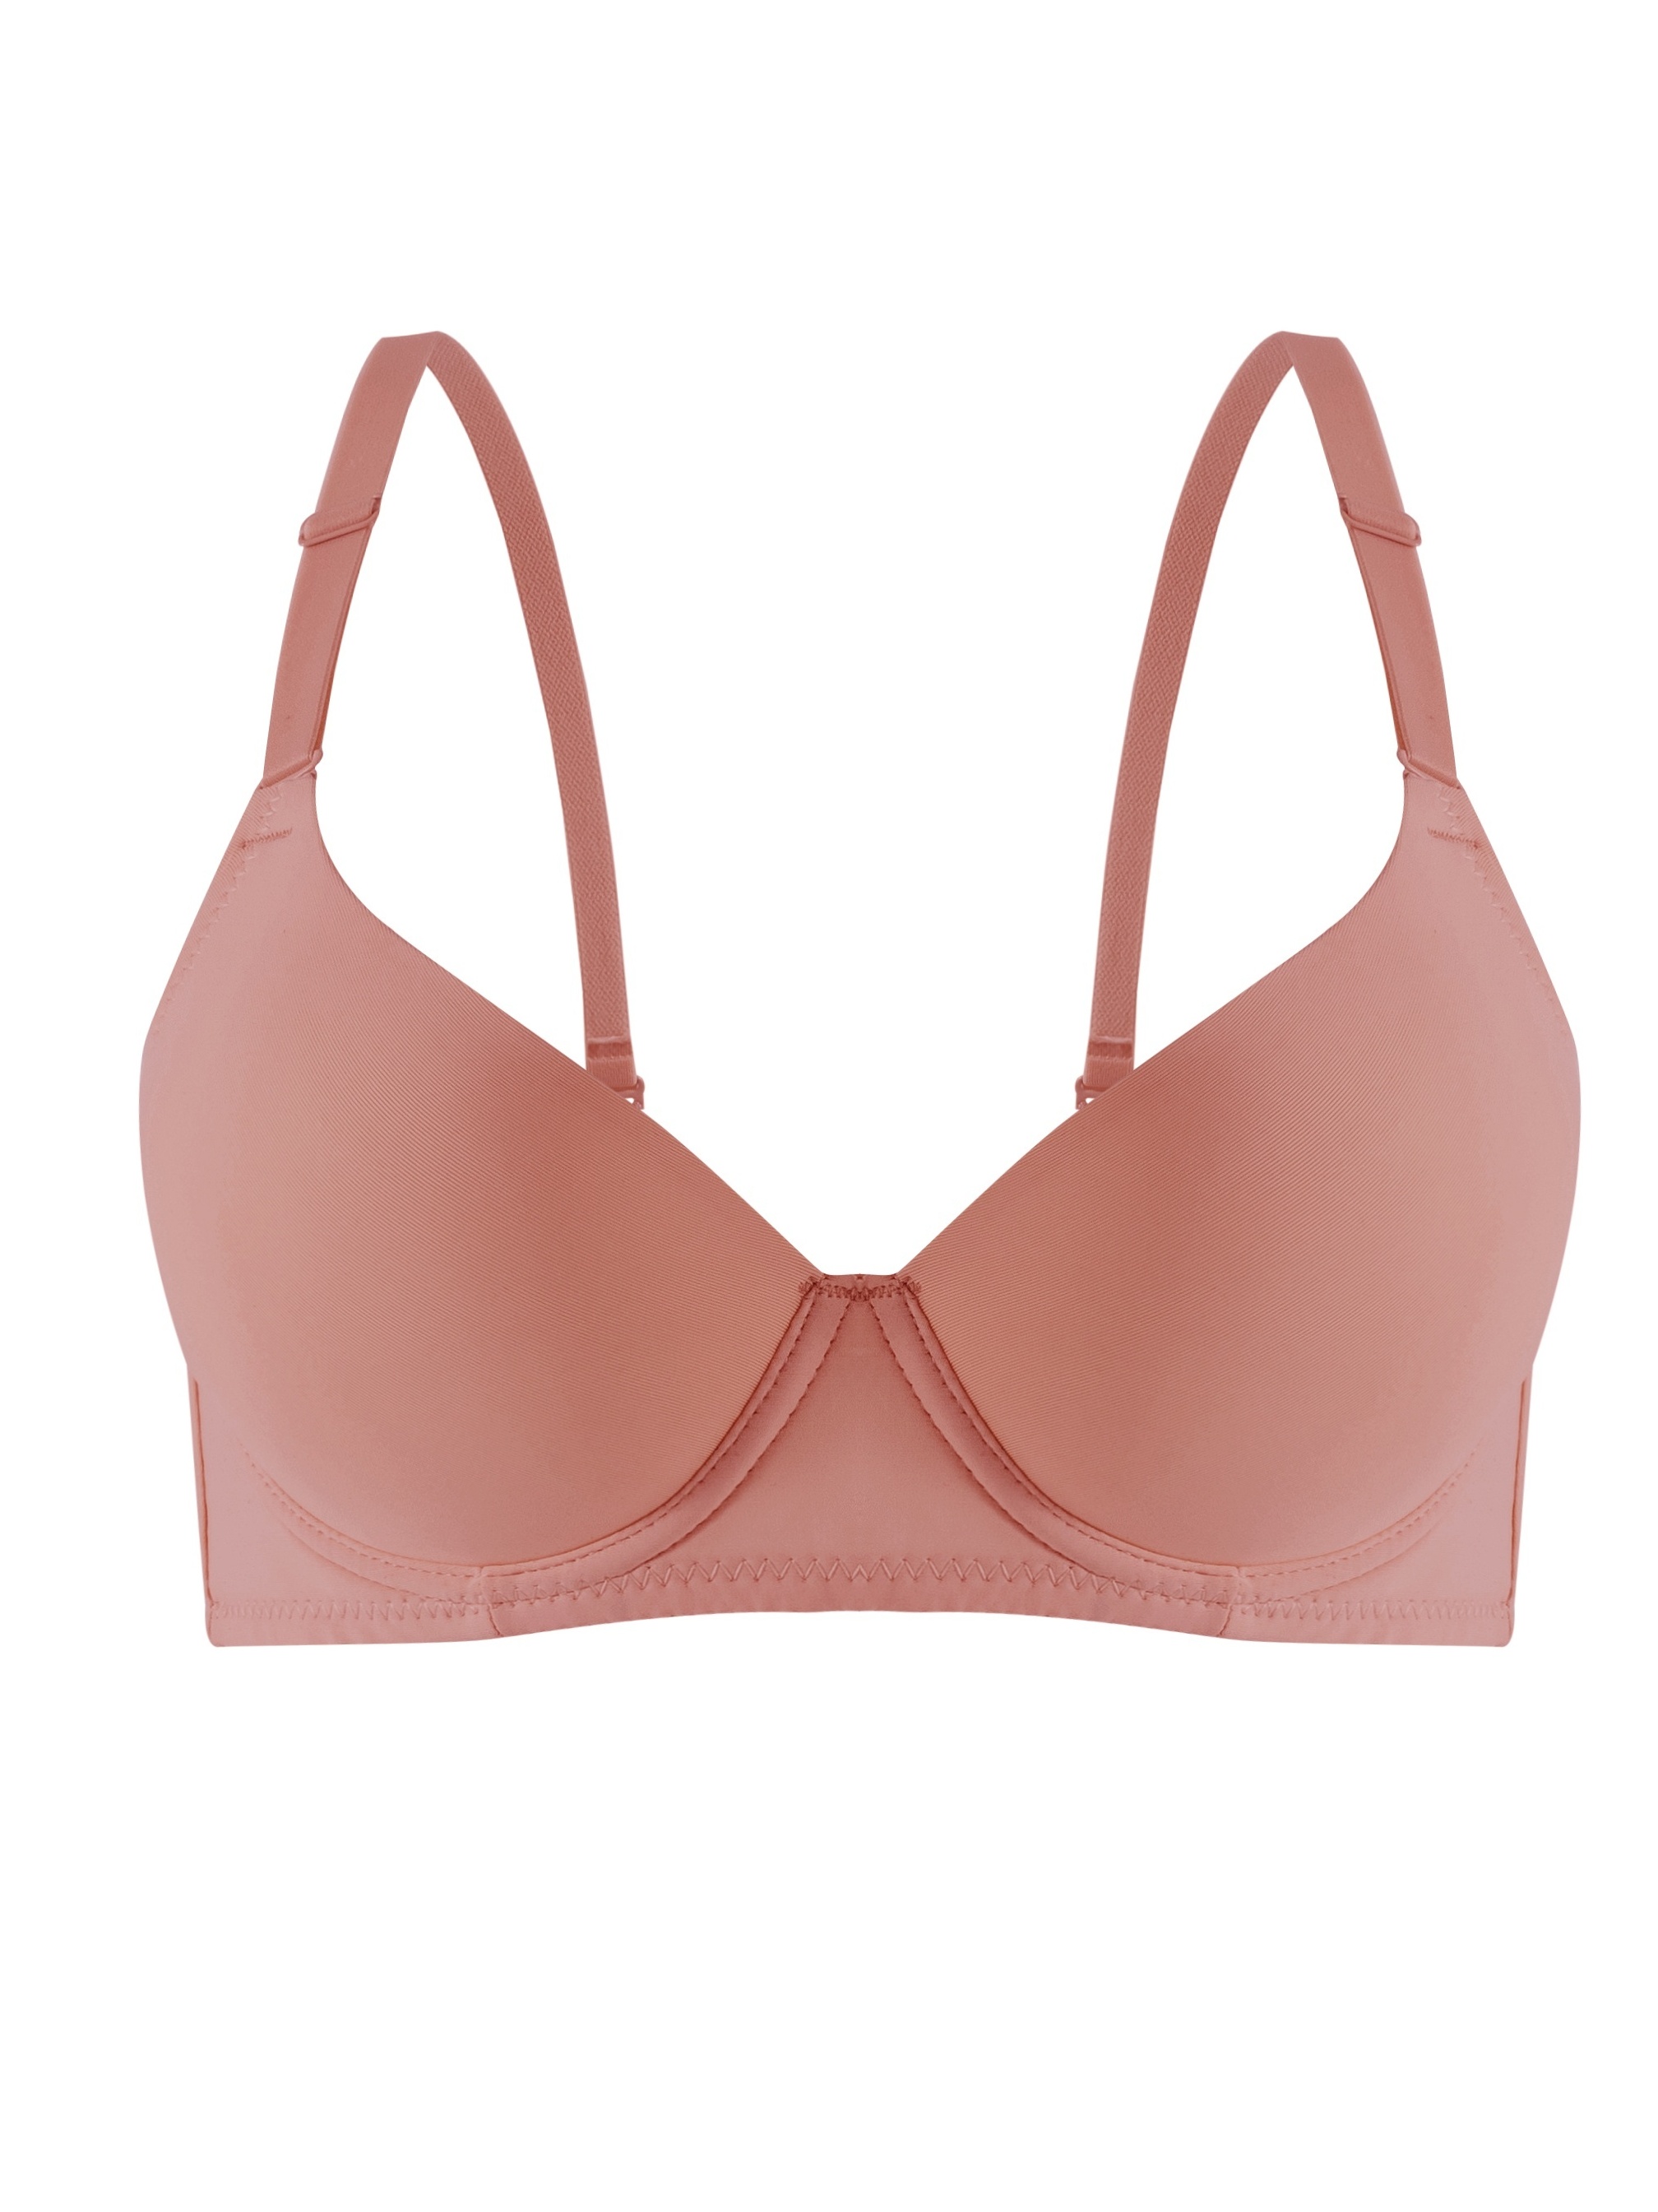 Tommie Copper - White - Intimates 